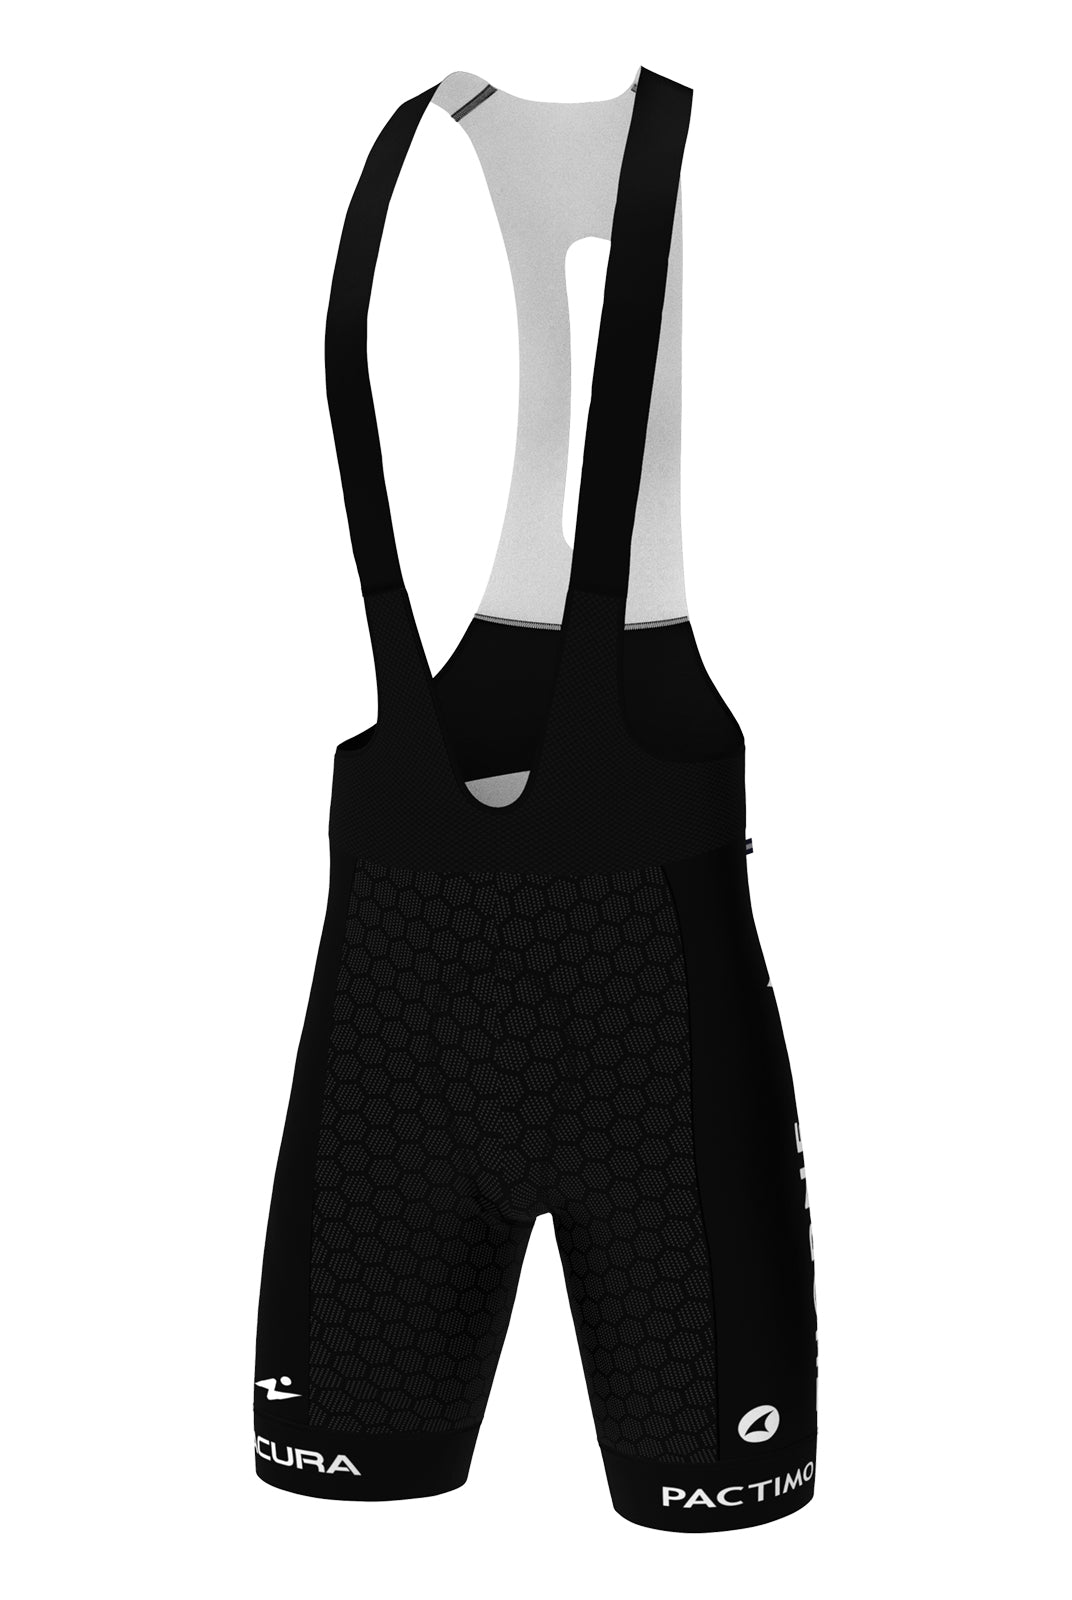 Men's Human Powered Health Cycling Bibs - Ascent Front View